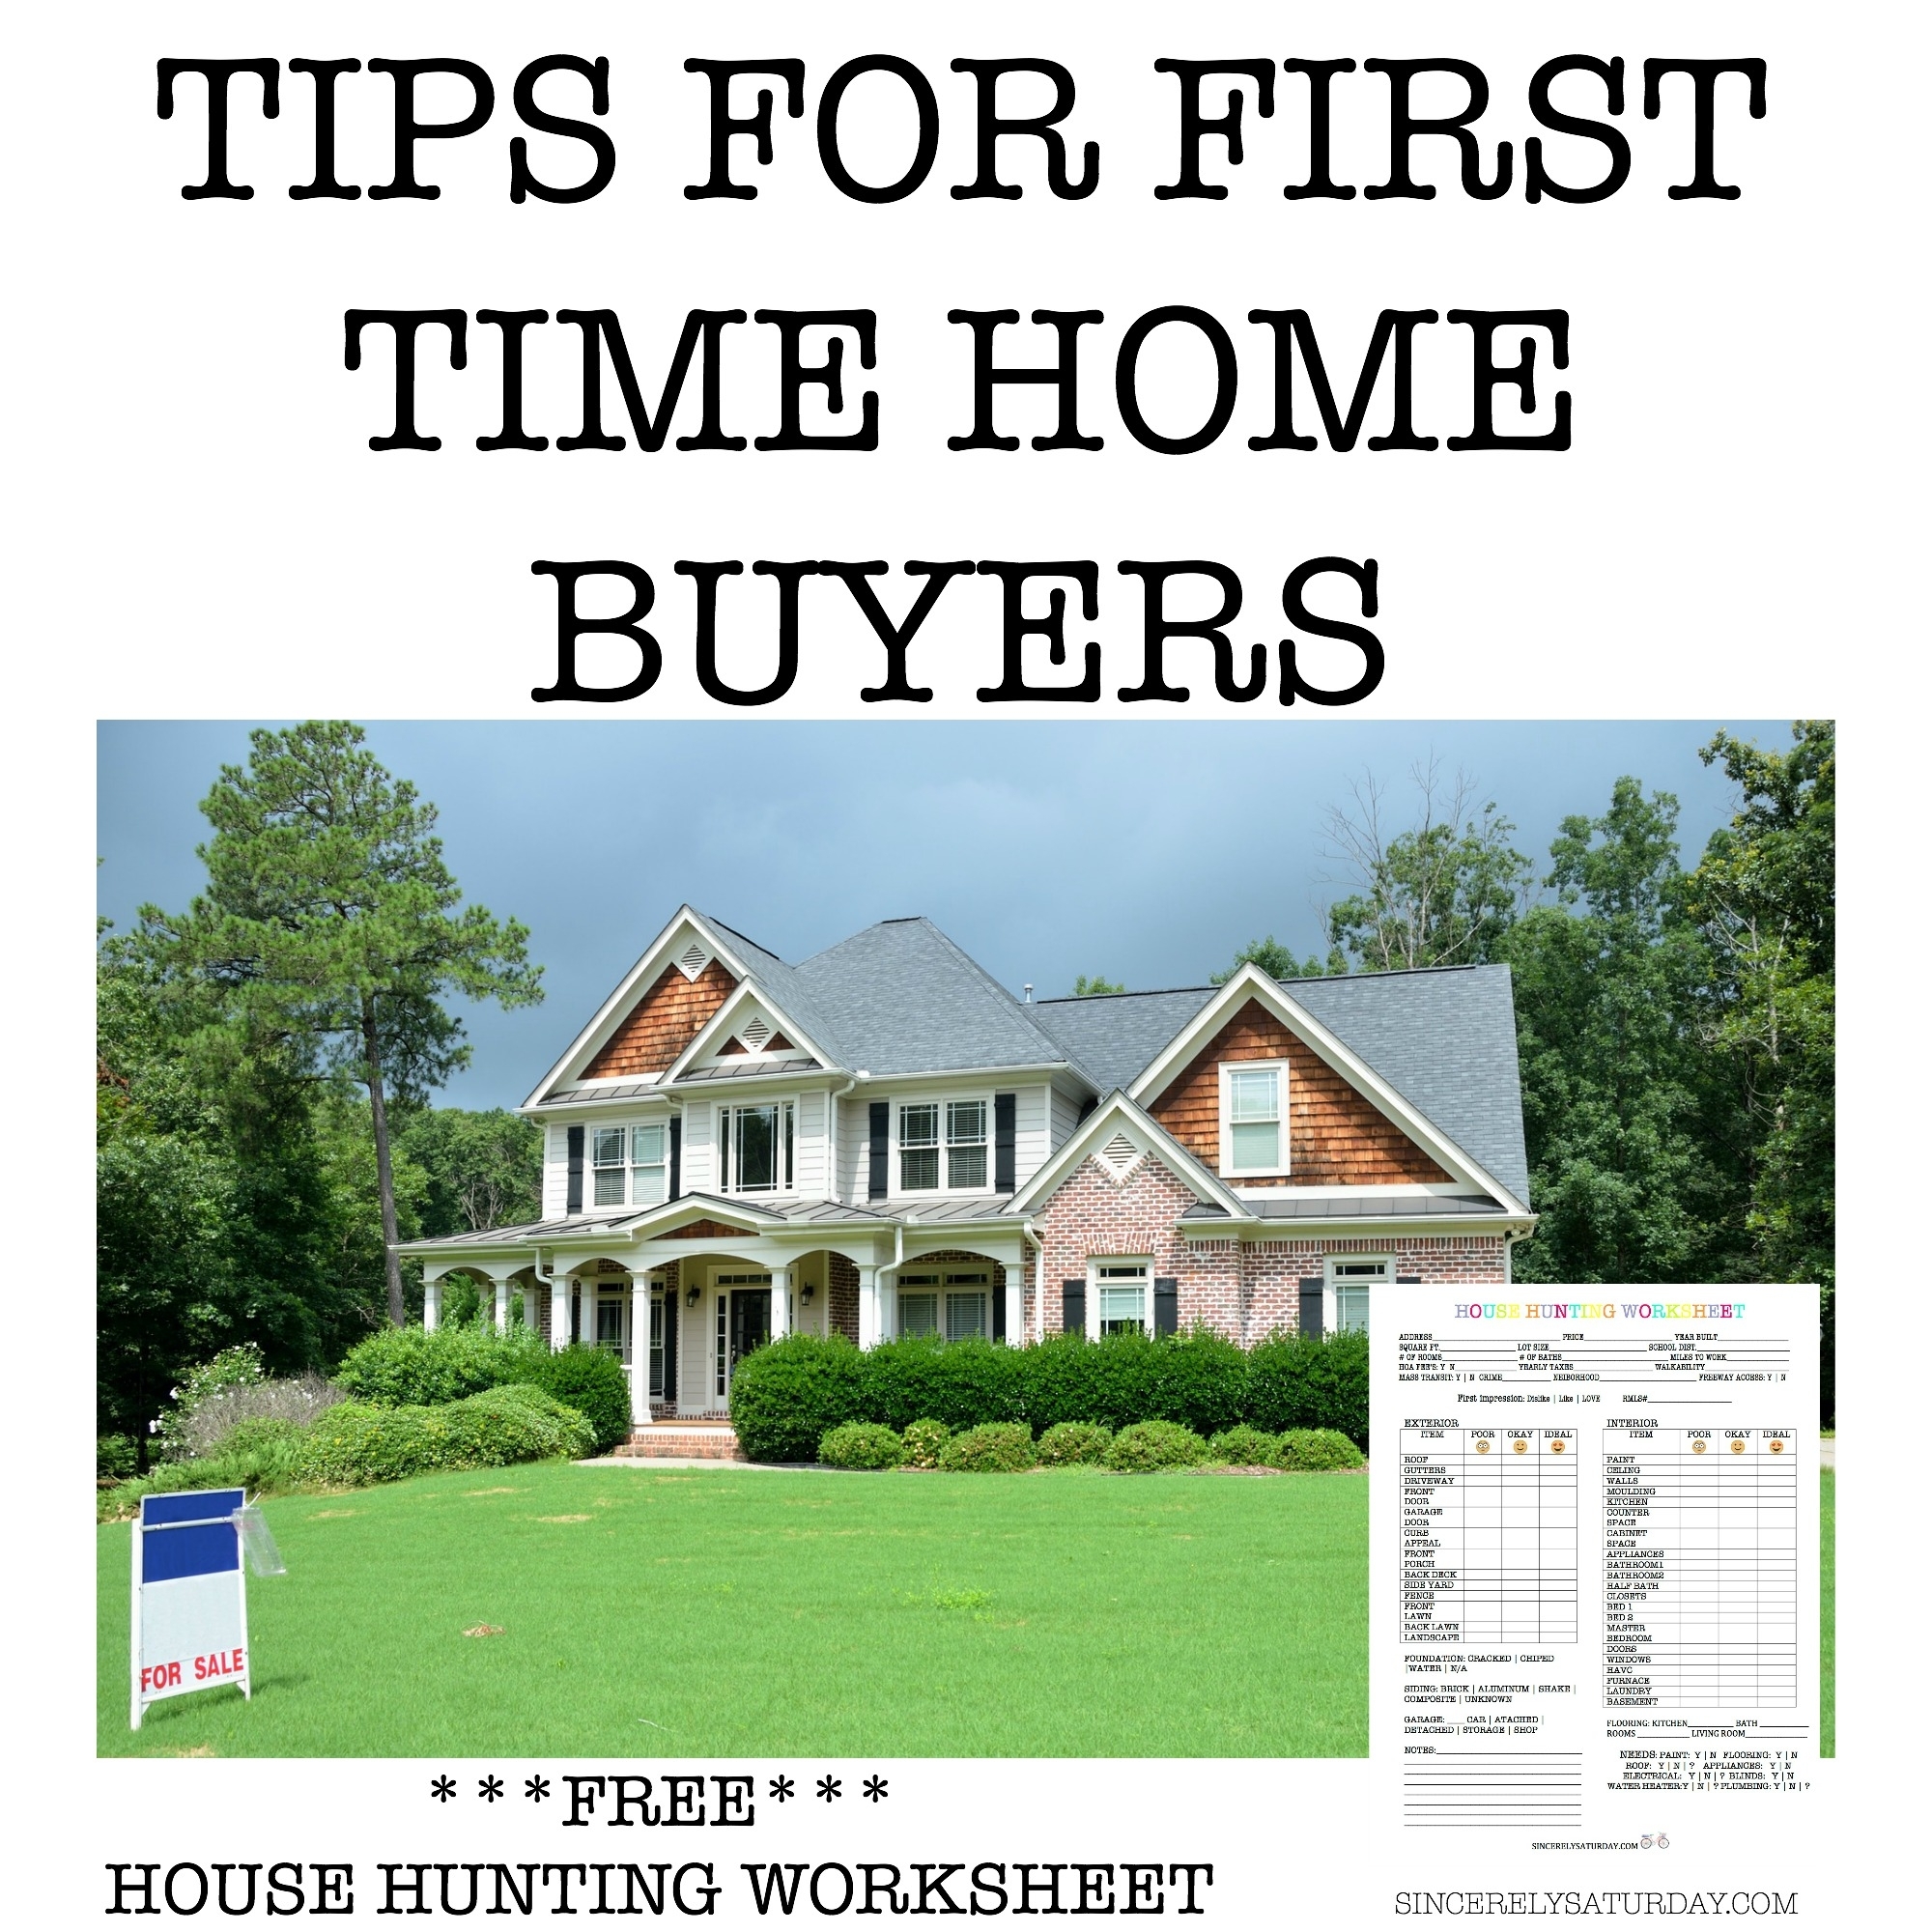 Tips for first time home buyers